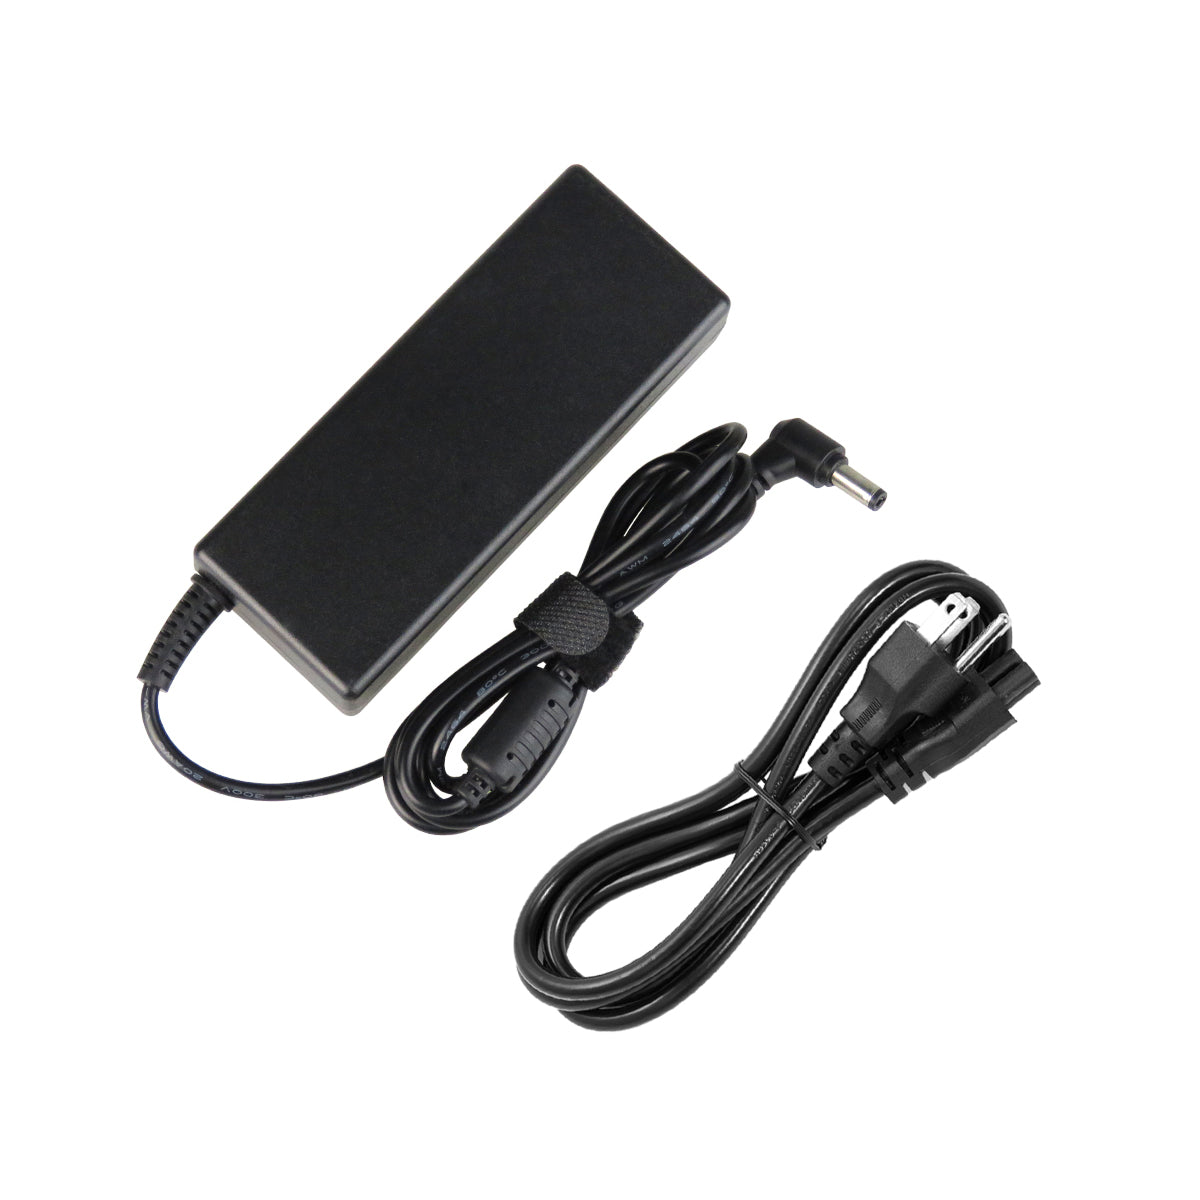 AC Adapter Charger for ASUS X54C-RS01 Notebook.